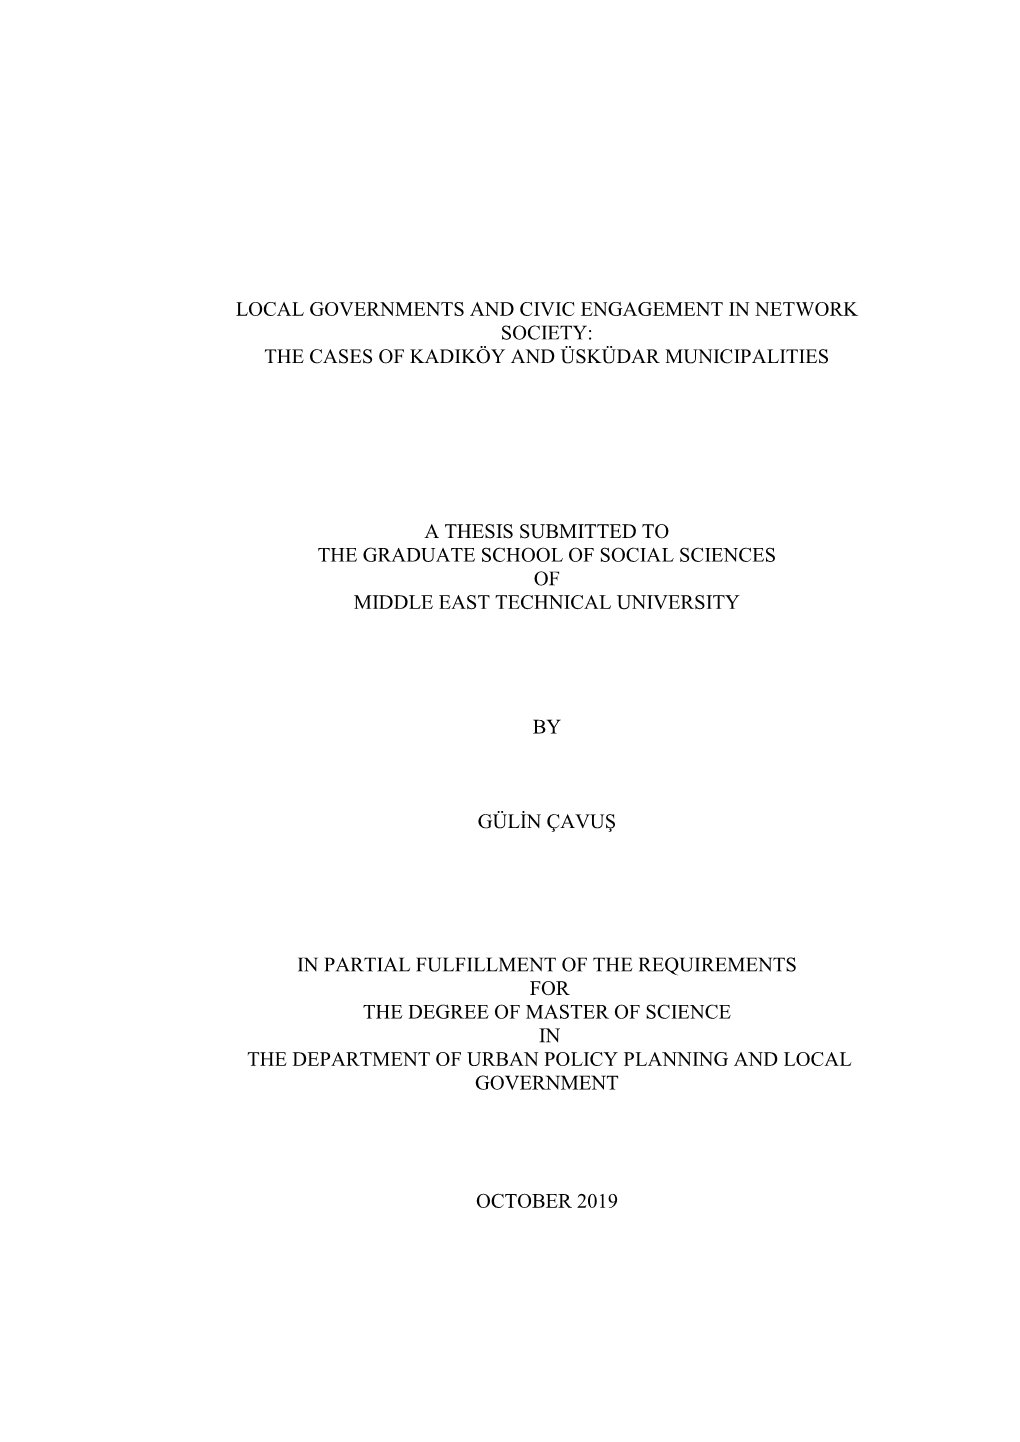 Local Governments and Civic Engagement in Network Society: the Cases of Kadiköy and Üsküdar Municipalities a Thesis Submitted